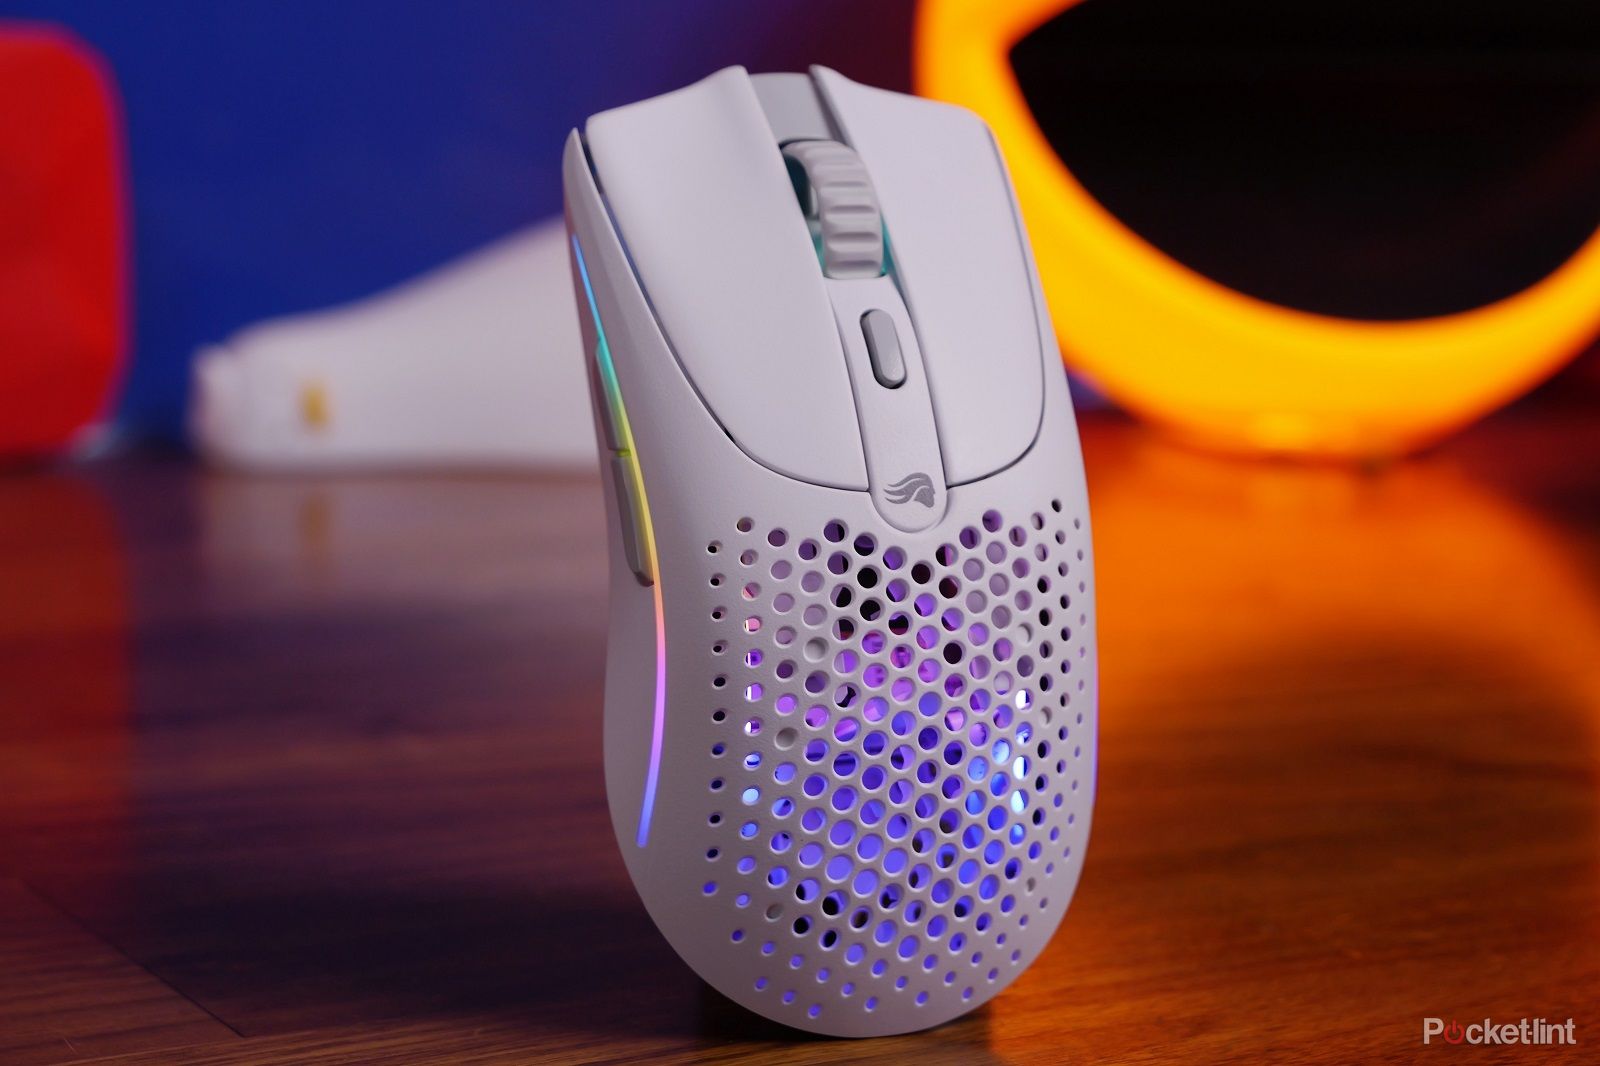 Glorious Model O2 wireless gaming mouse review 0a